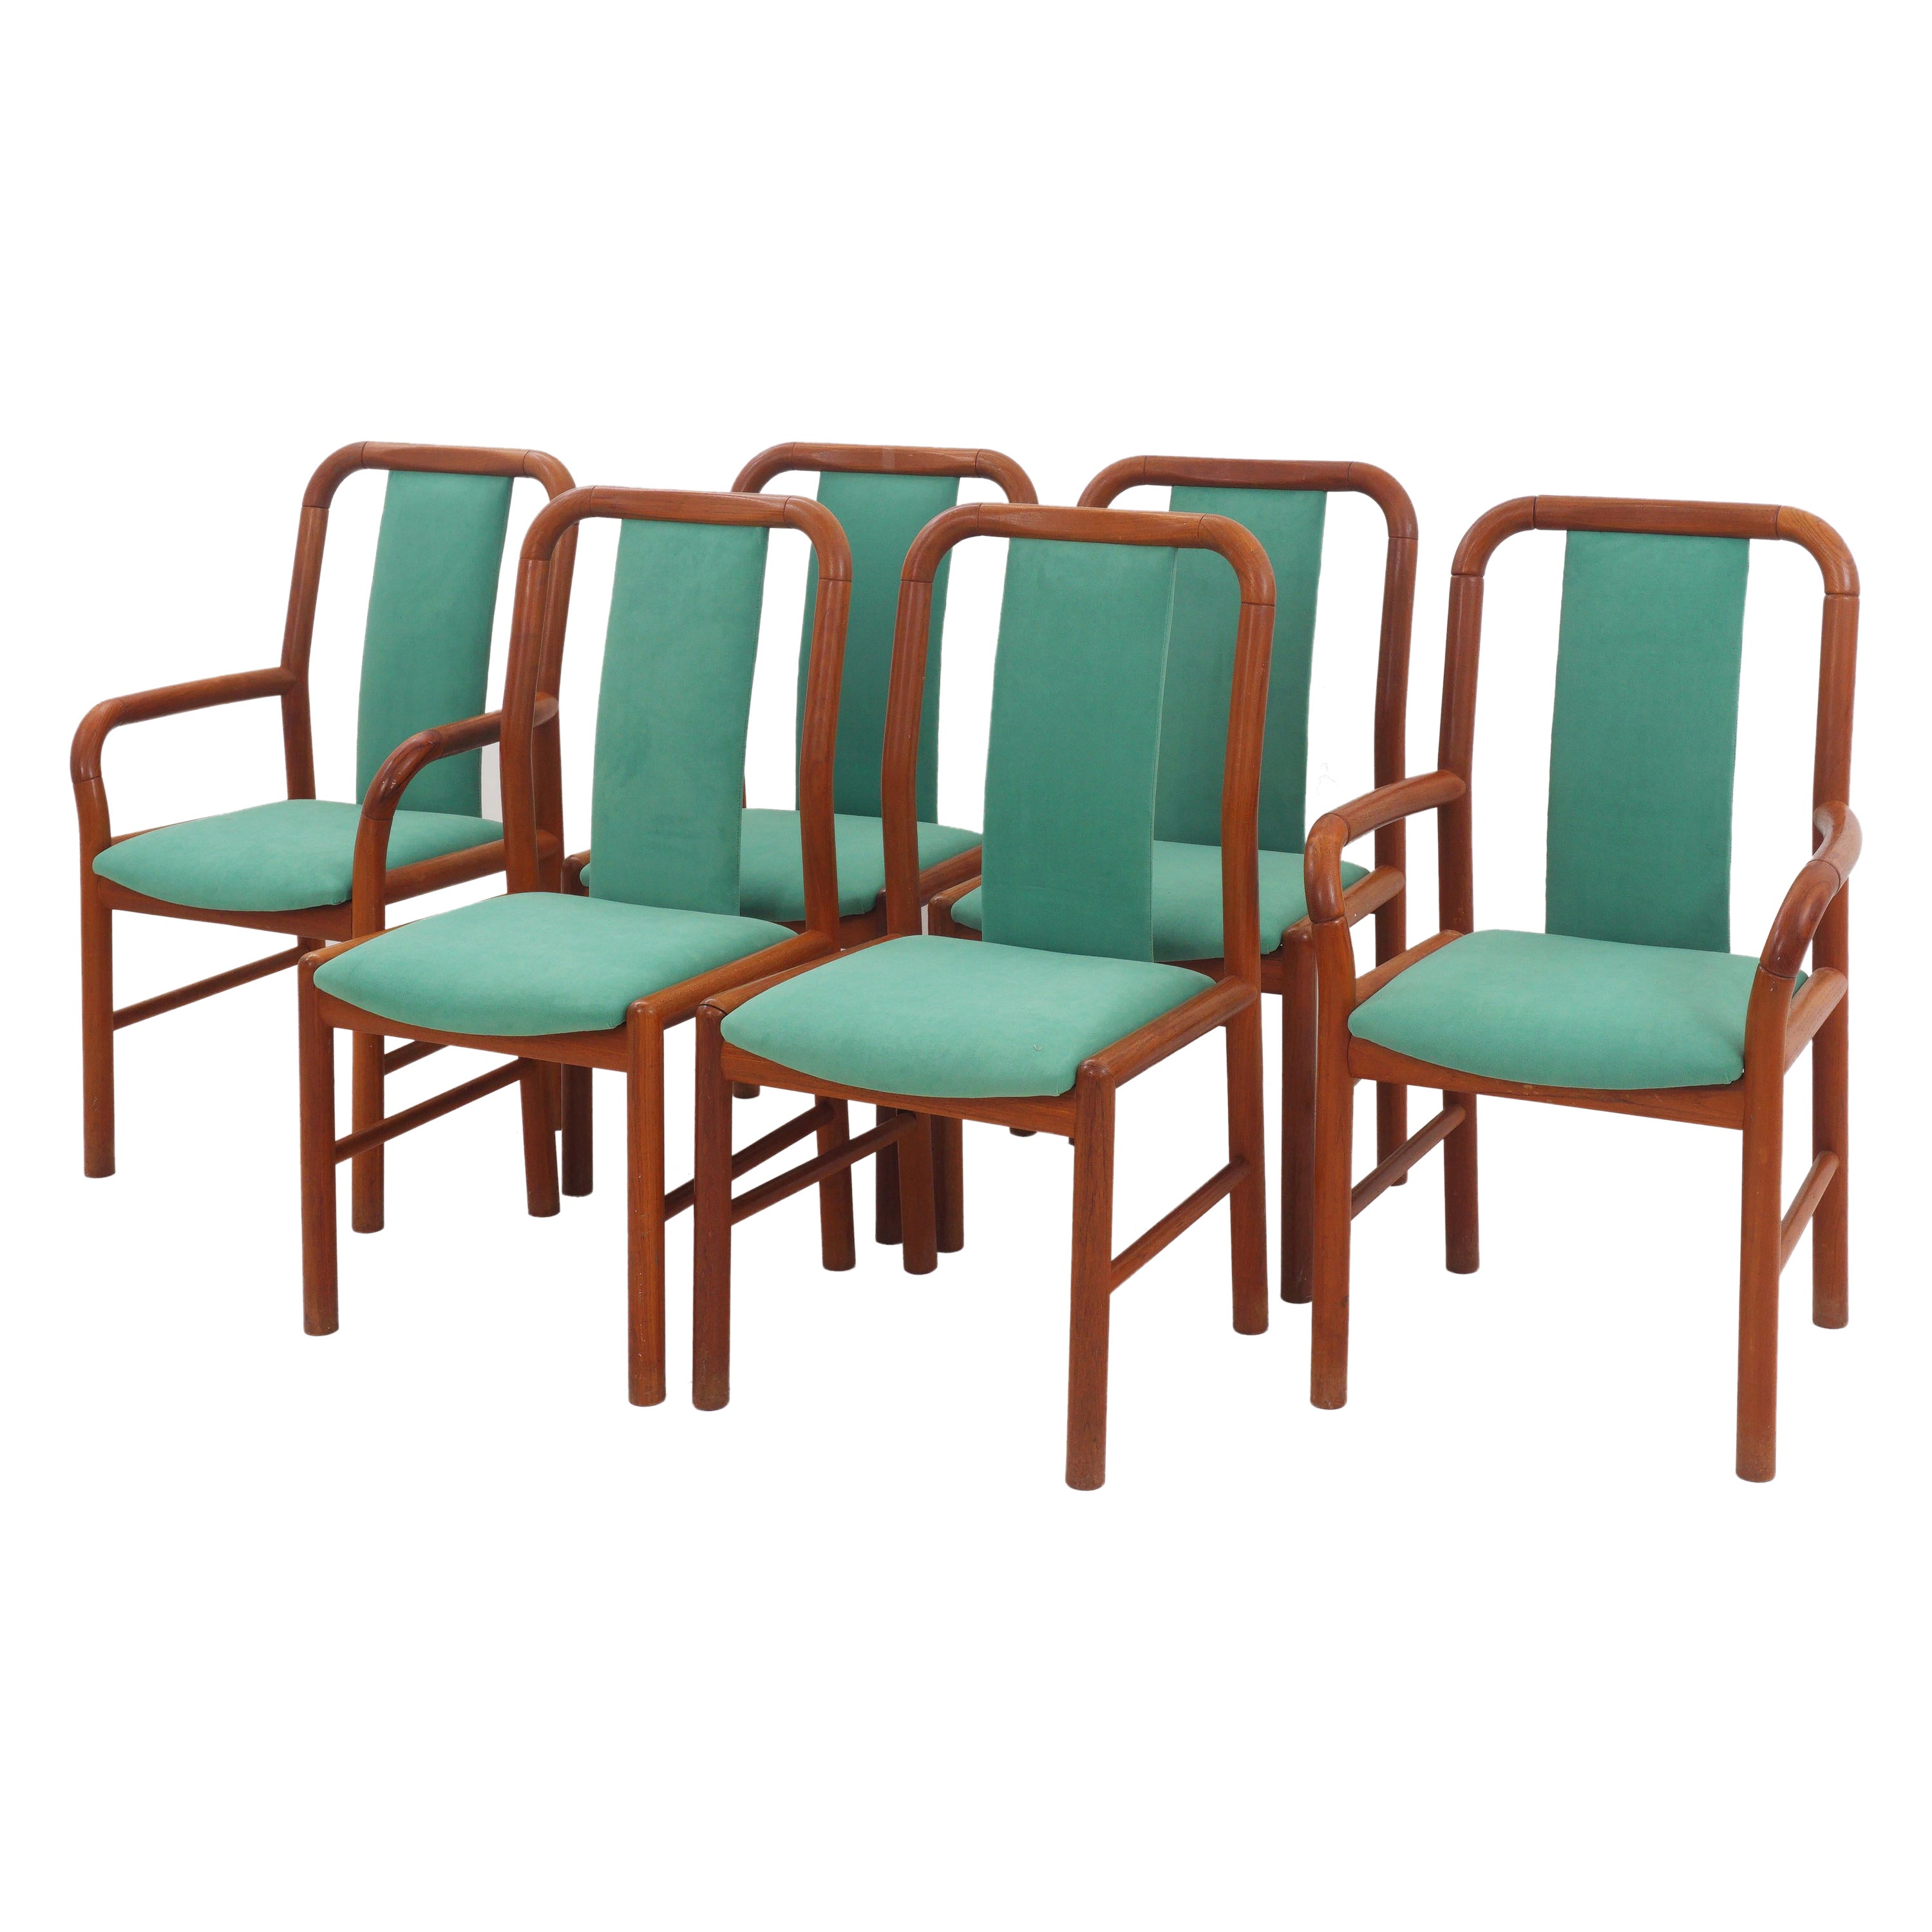 Midcentury Green Upholstered Dining Chairs, 1970s For Sale